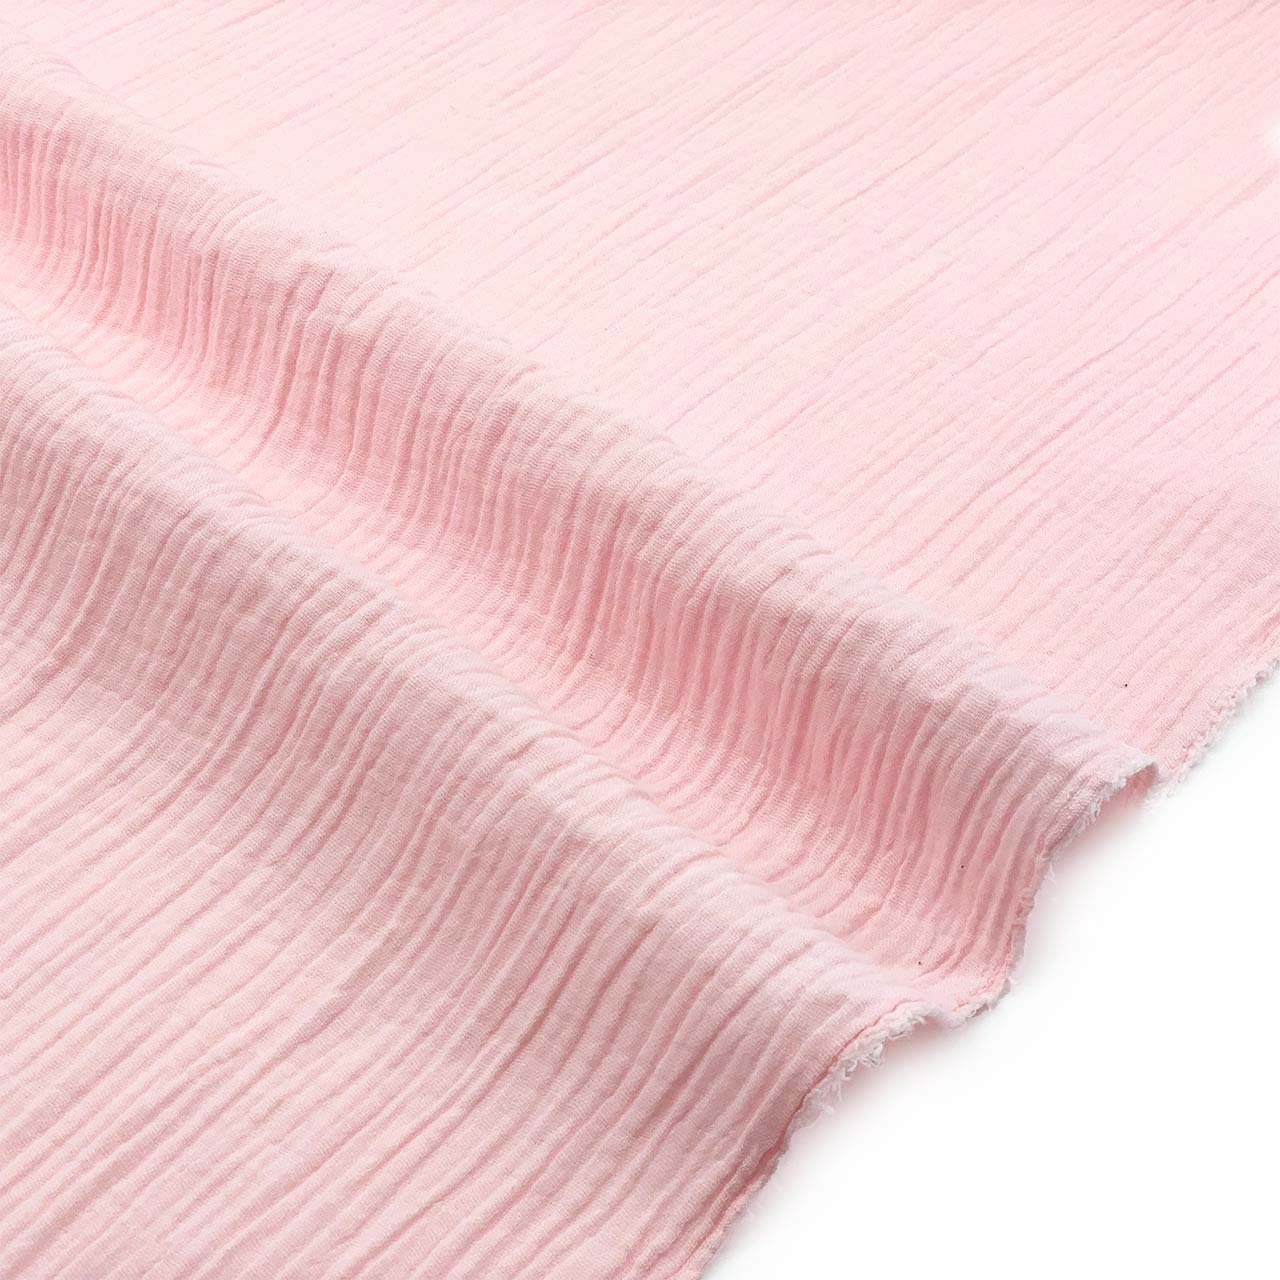 cotton fabric textured petal pink double gauze cotton fabric collection